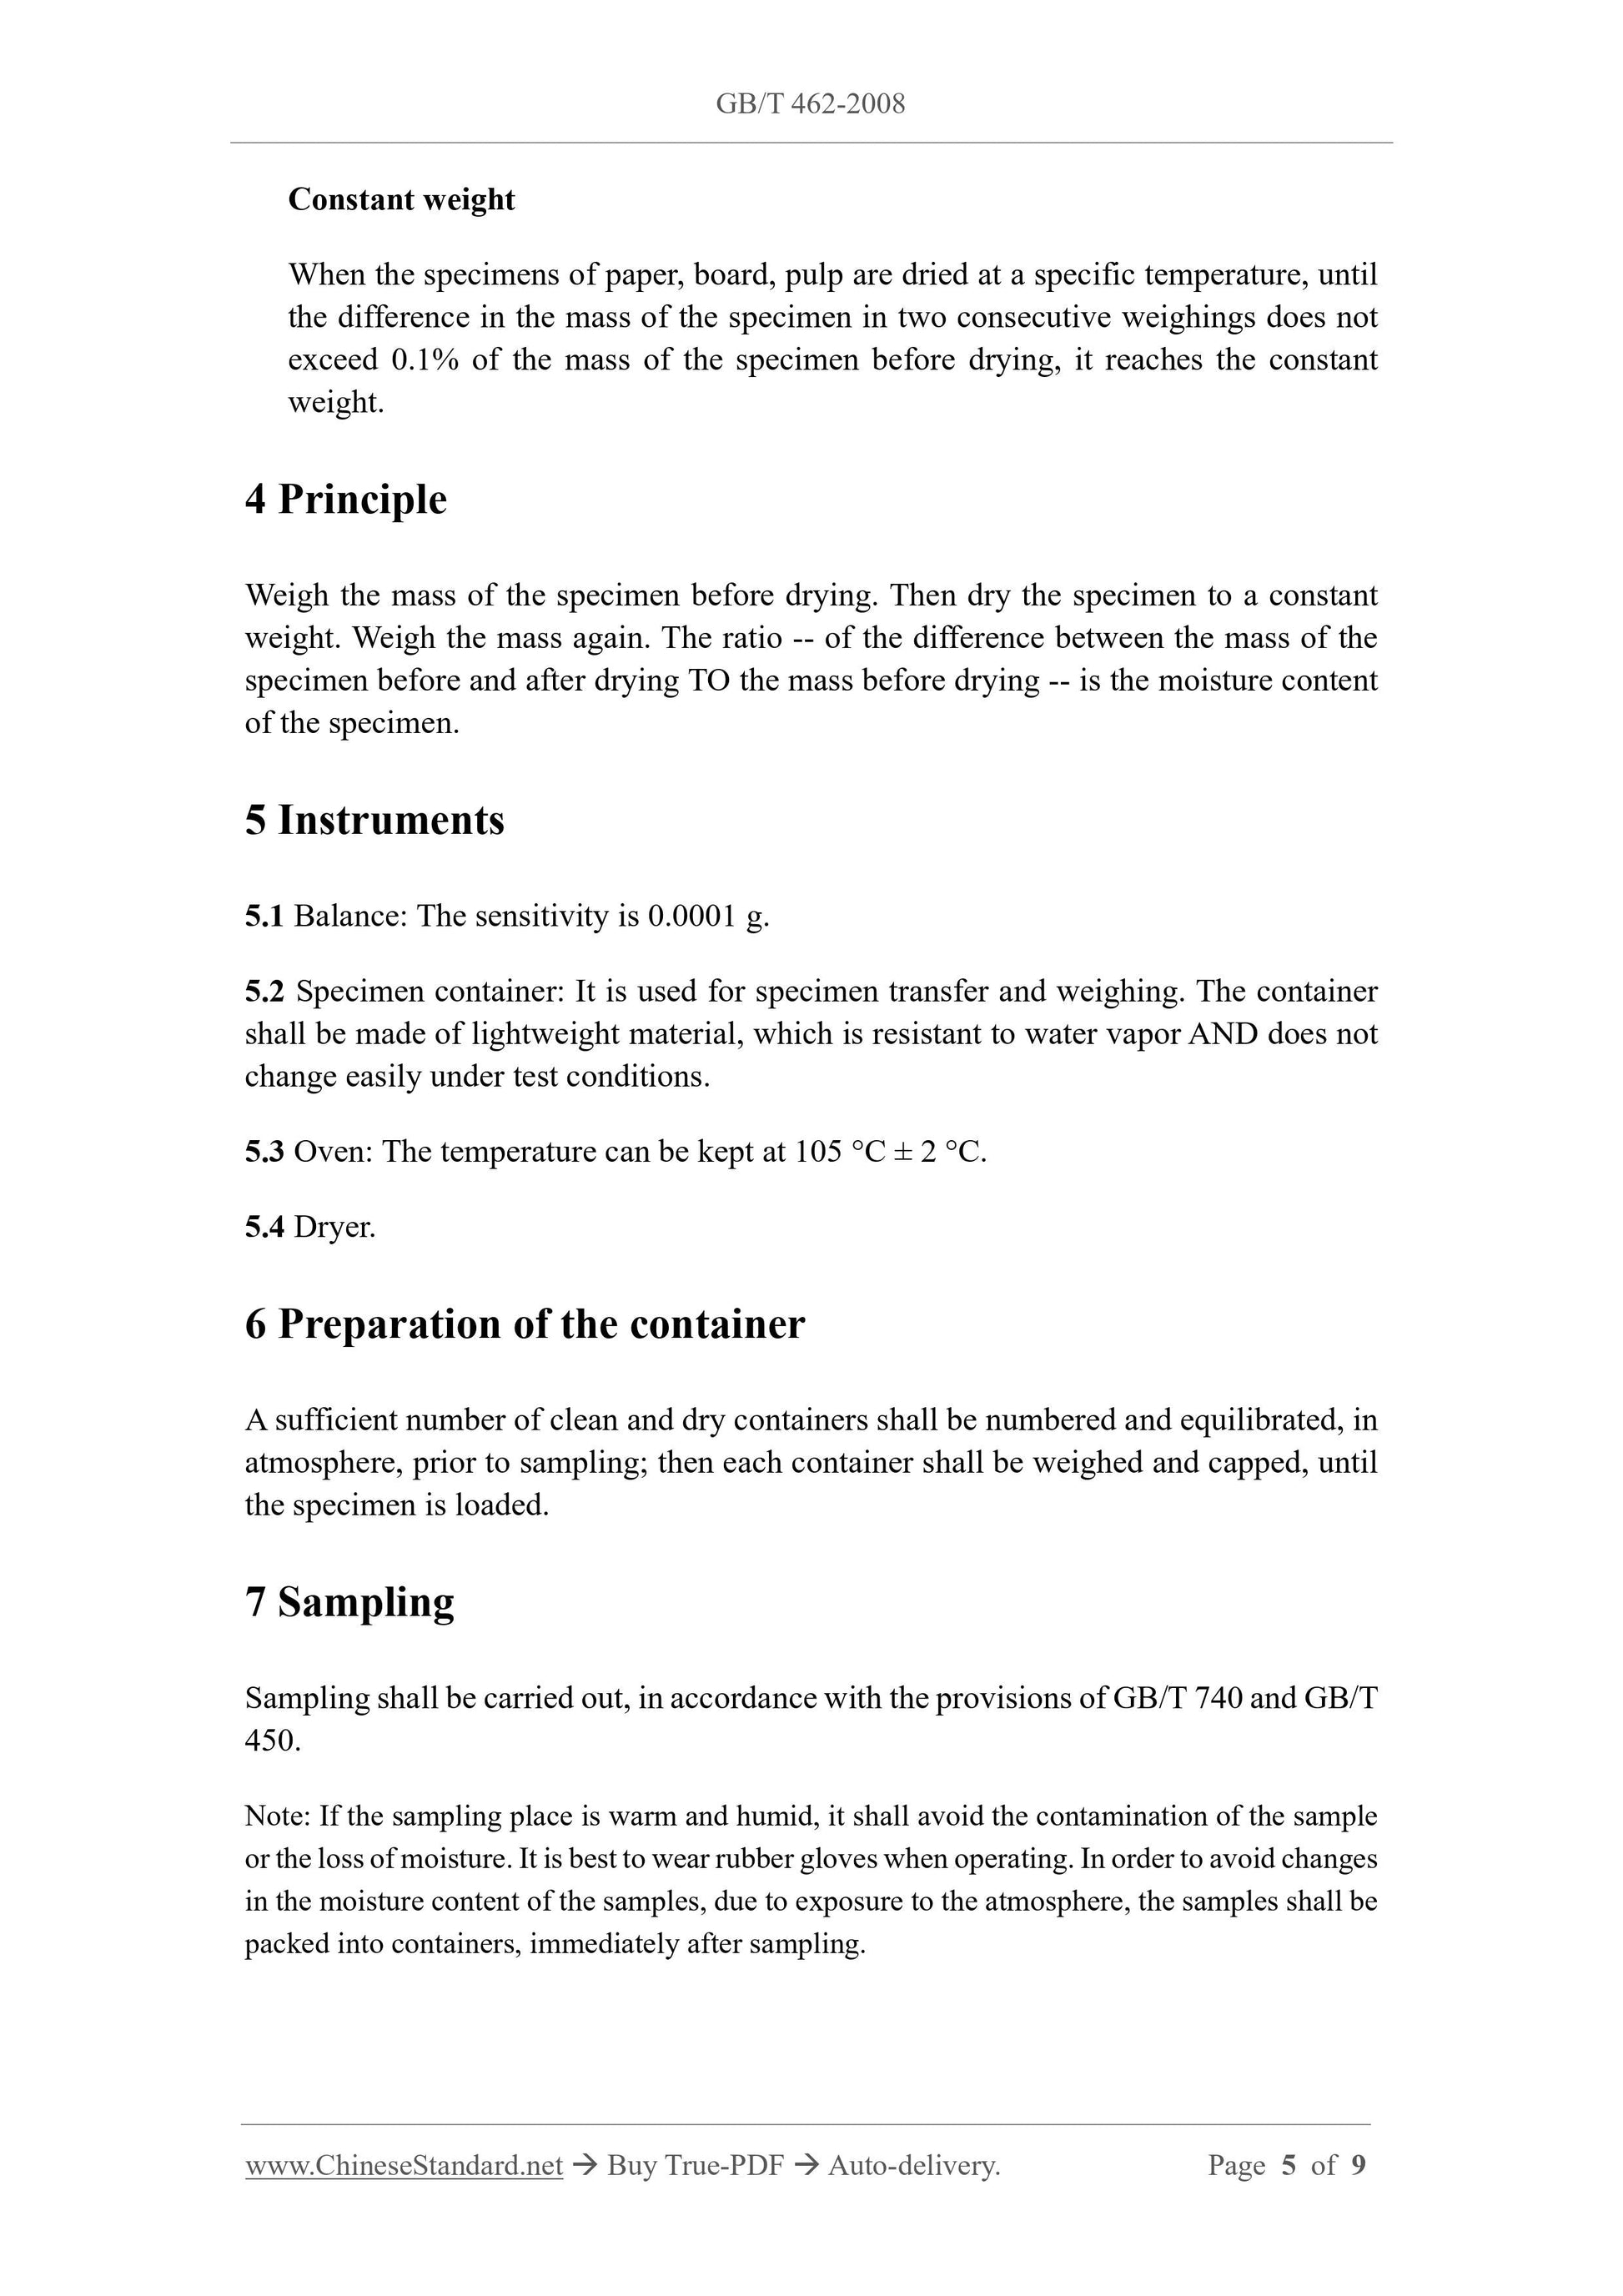 GB/T 462-2008 Page 4